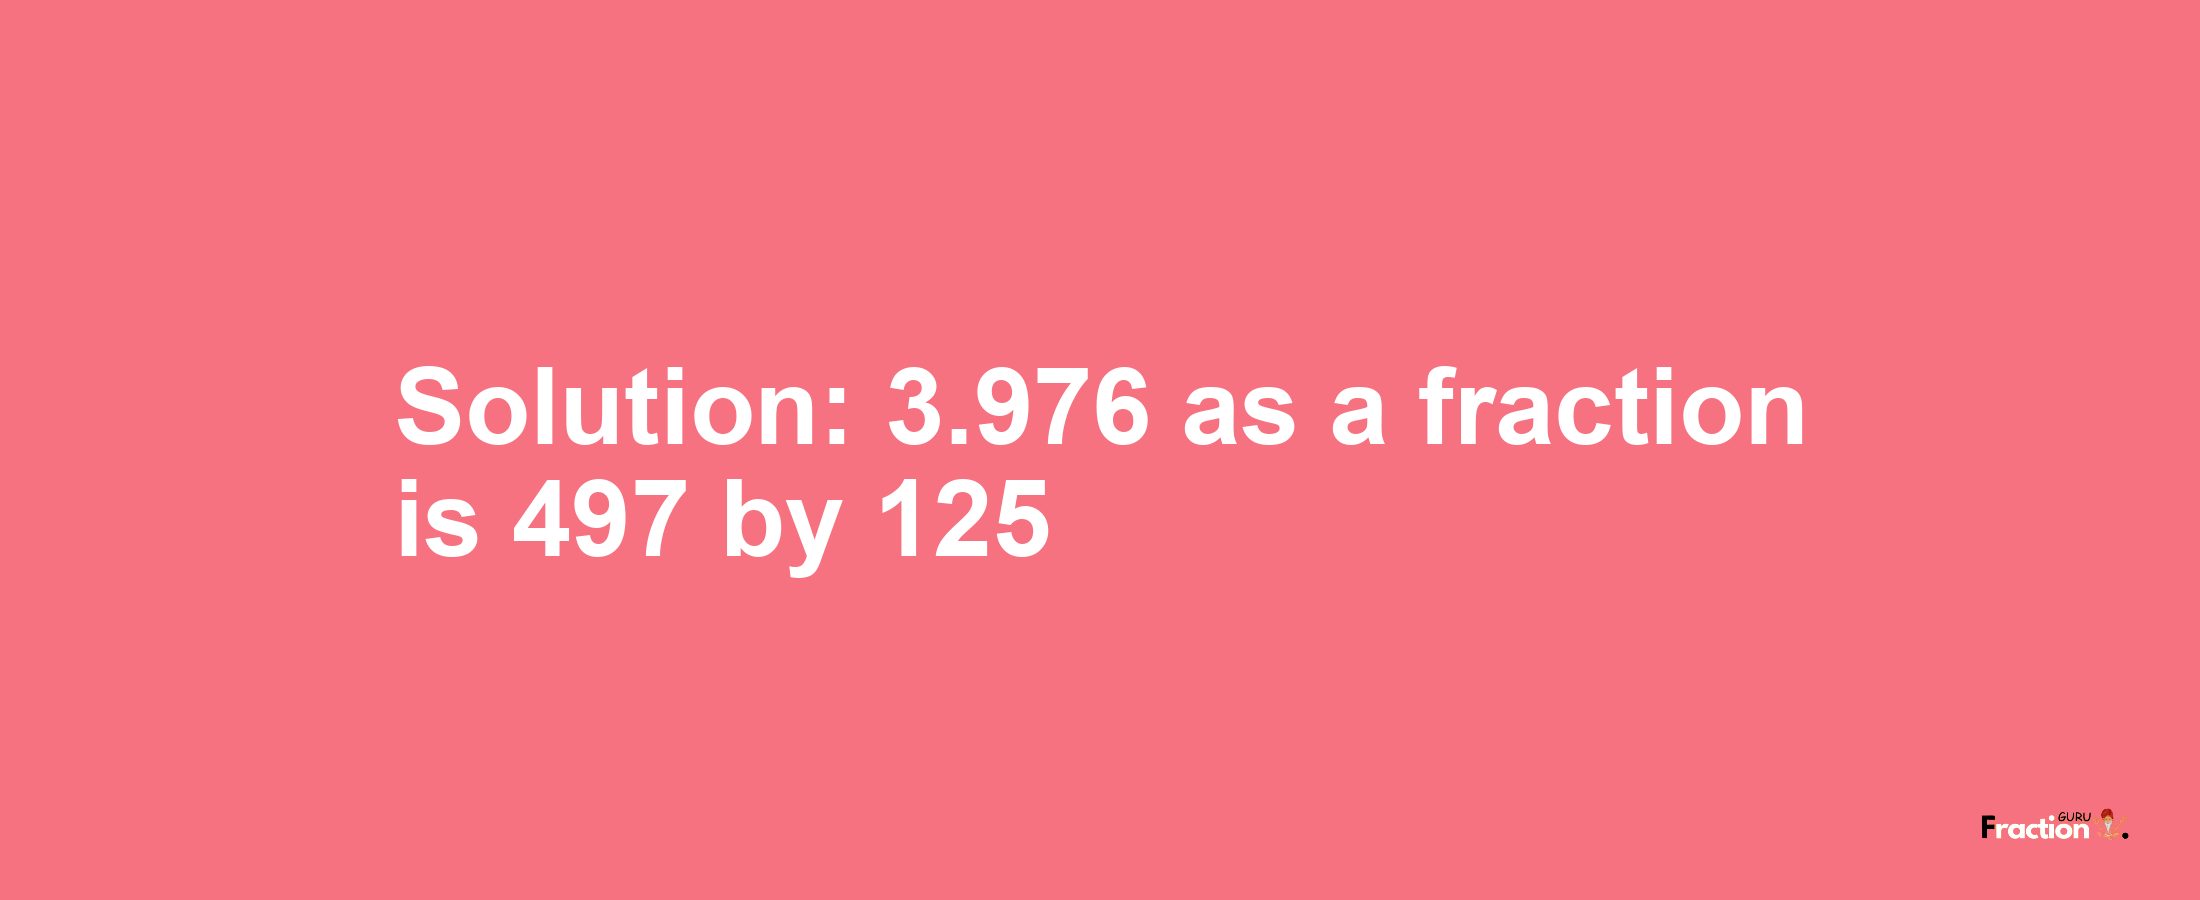 Solution:3.976 as a fraction is 497/125